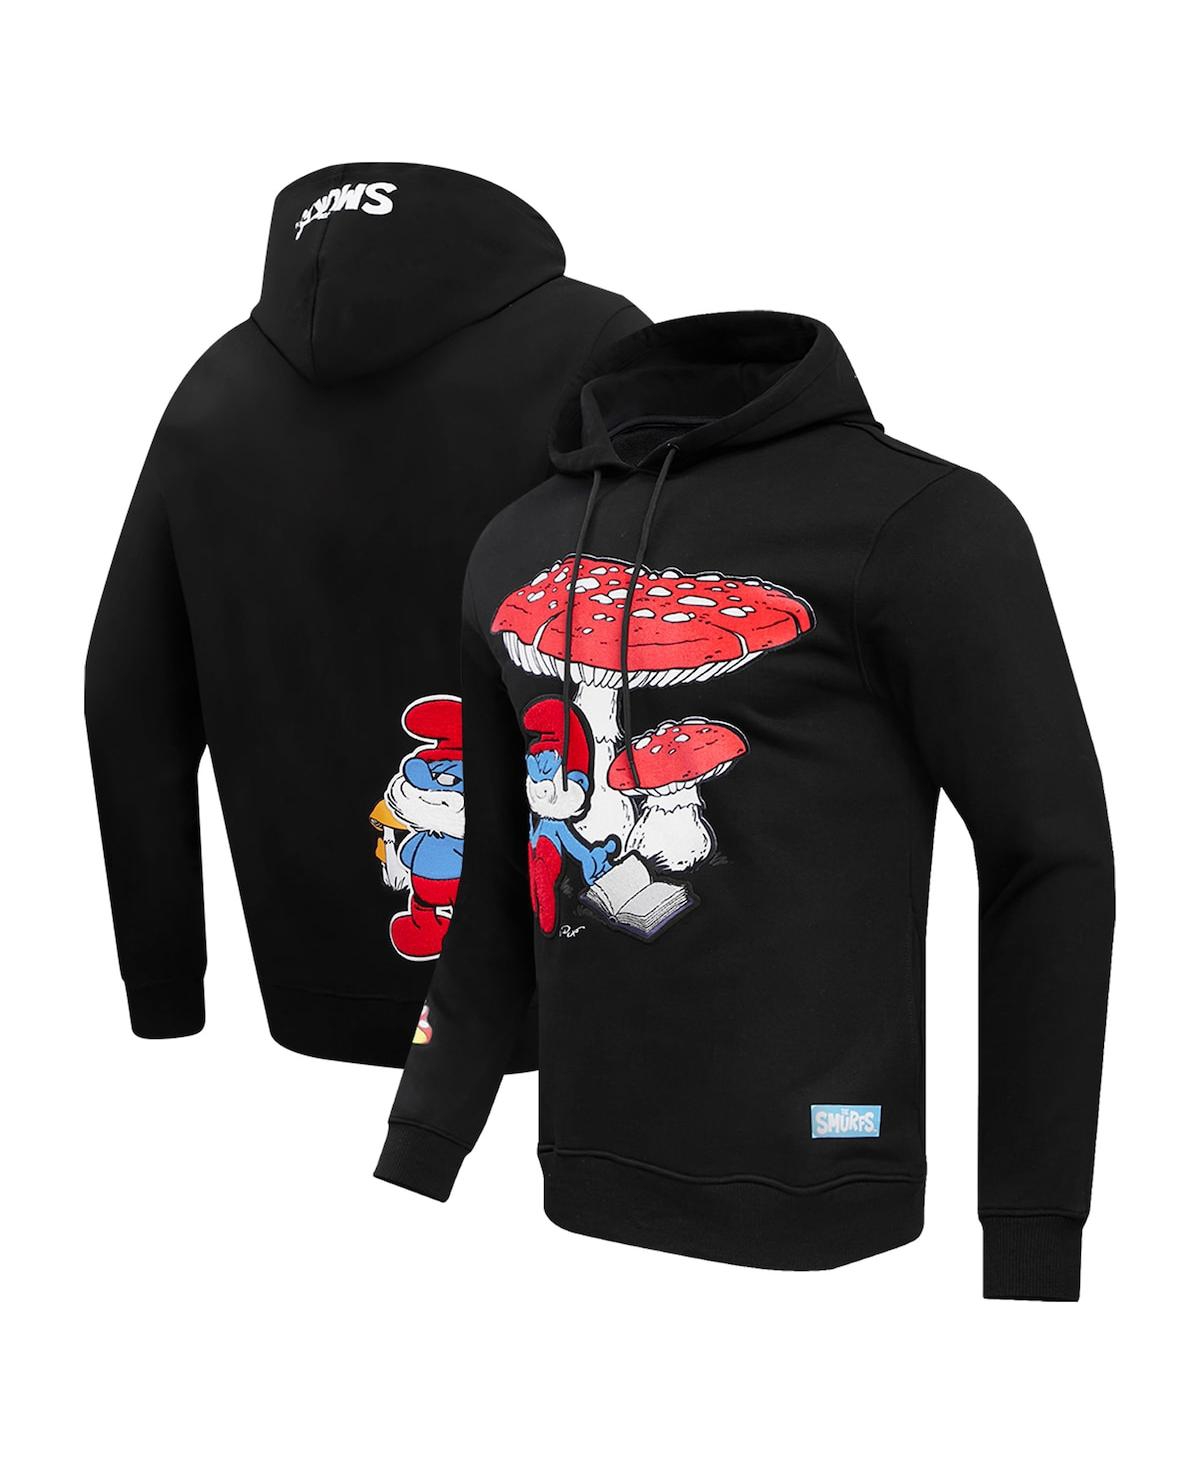 Men's and Women's Freeze Max Black The Smurfs Papa Smurf Pullover Hoodie - Black